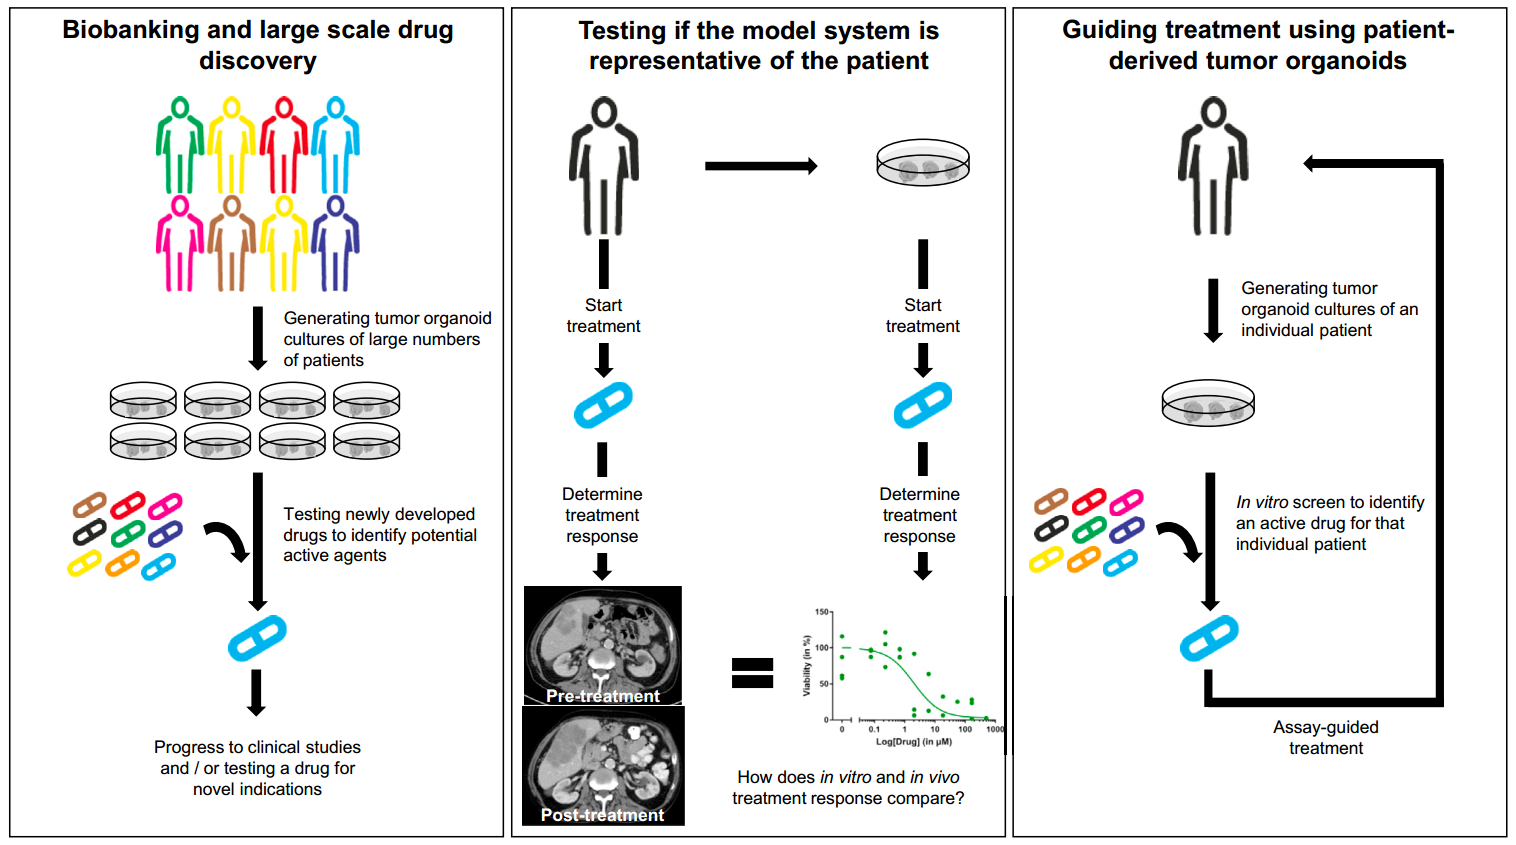 Patient-derived tumor organoids and their applications.